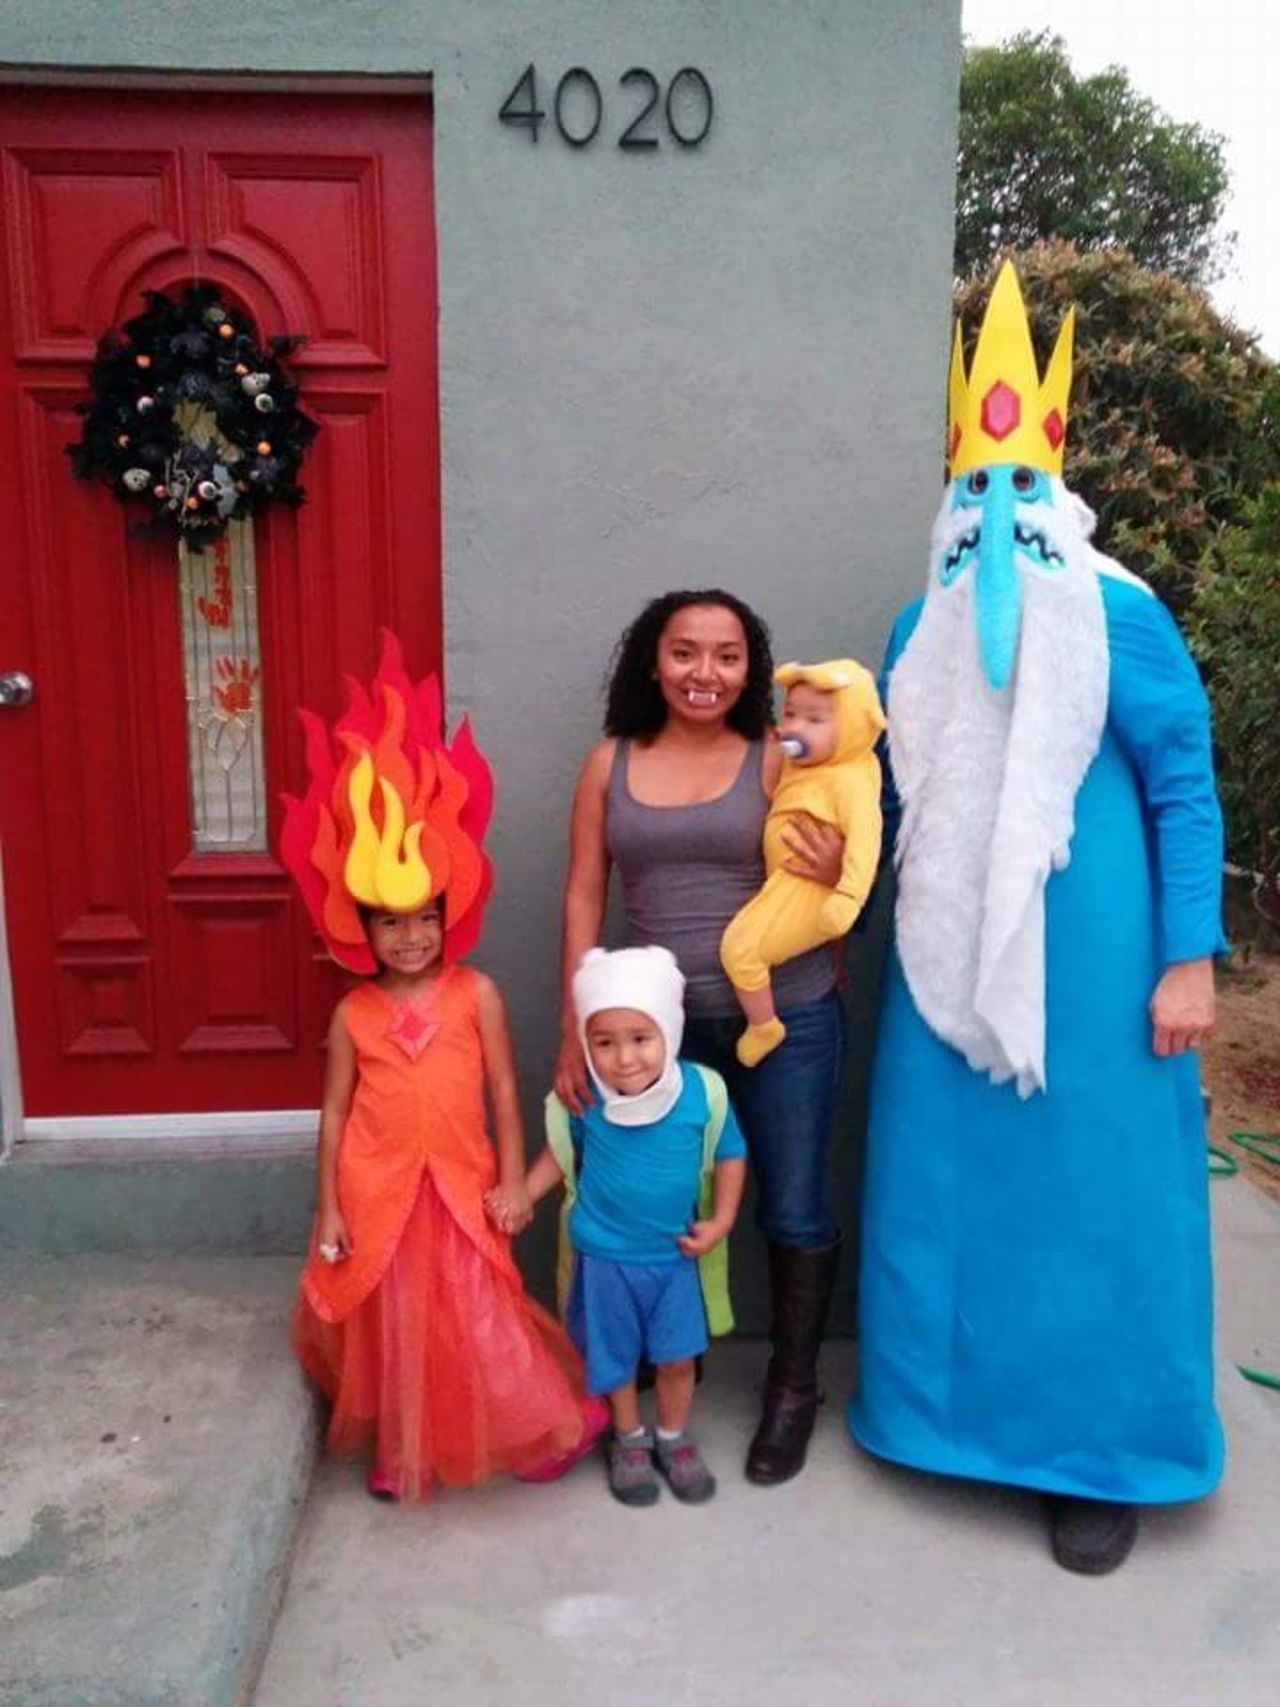 The family dressed up as "Adventure Time" characters for Halloween in 2014.